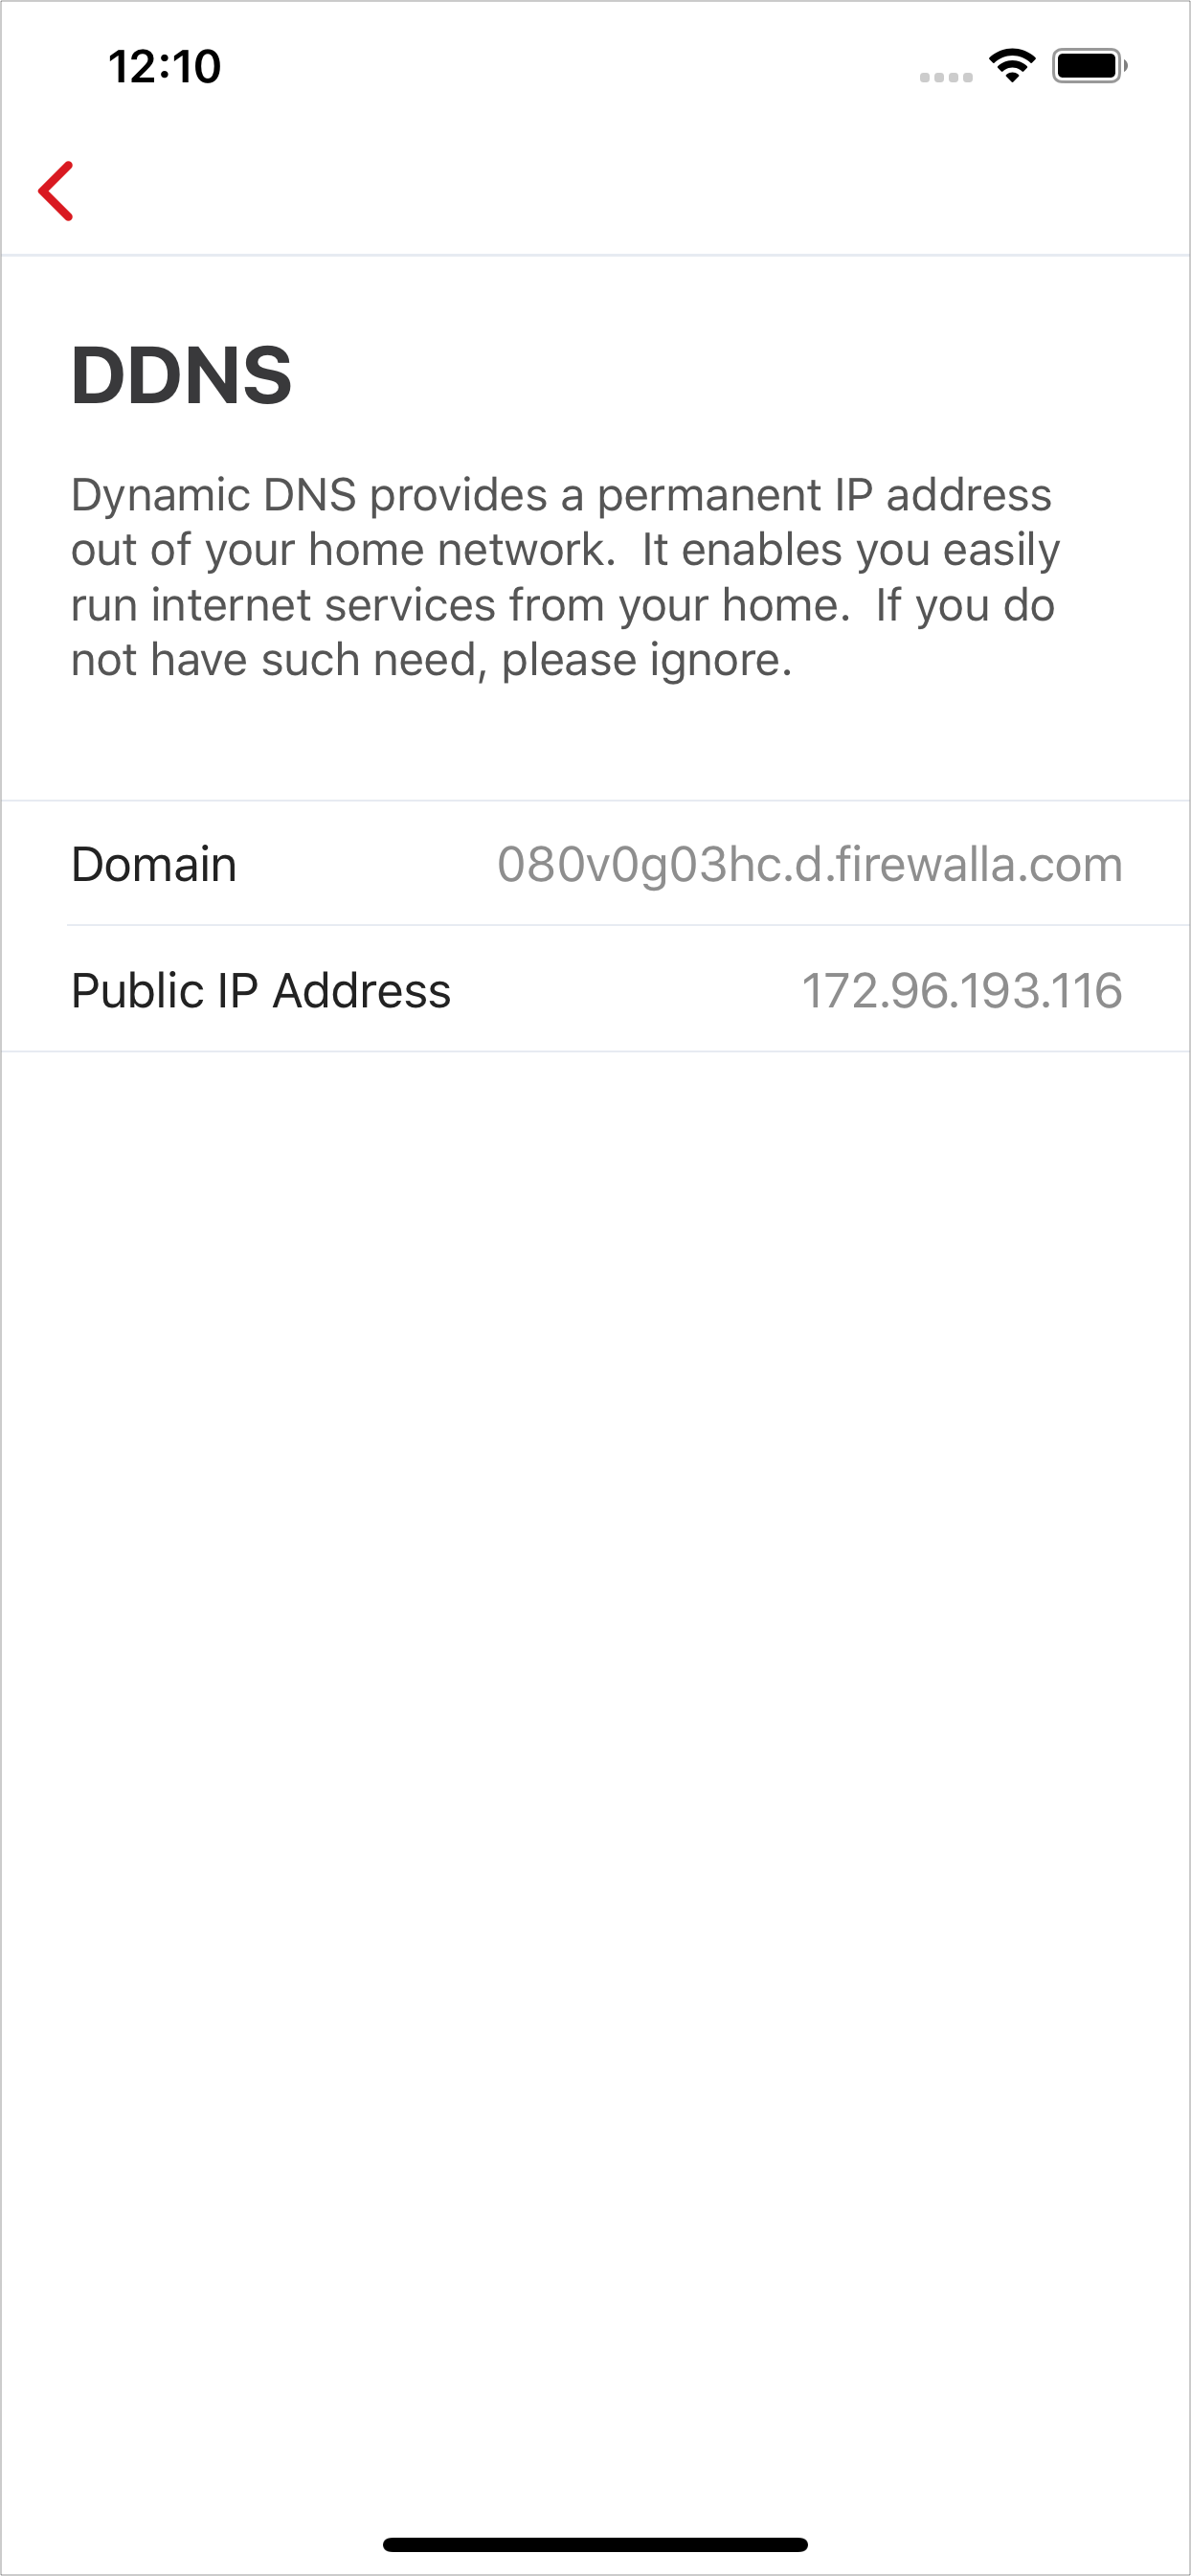 Firewalla app provides DNS info in the DDNS feature.